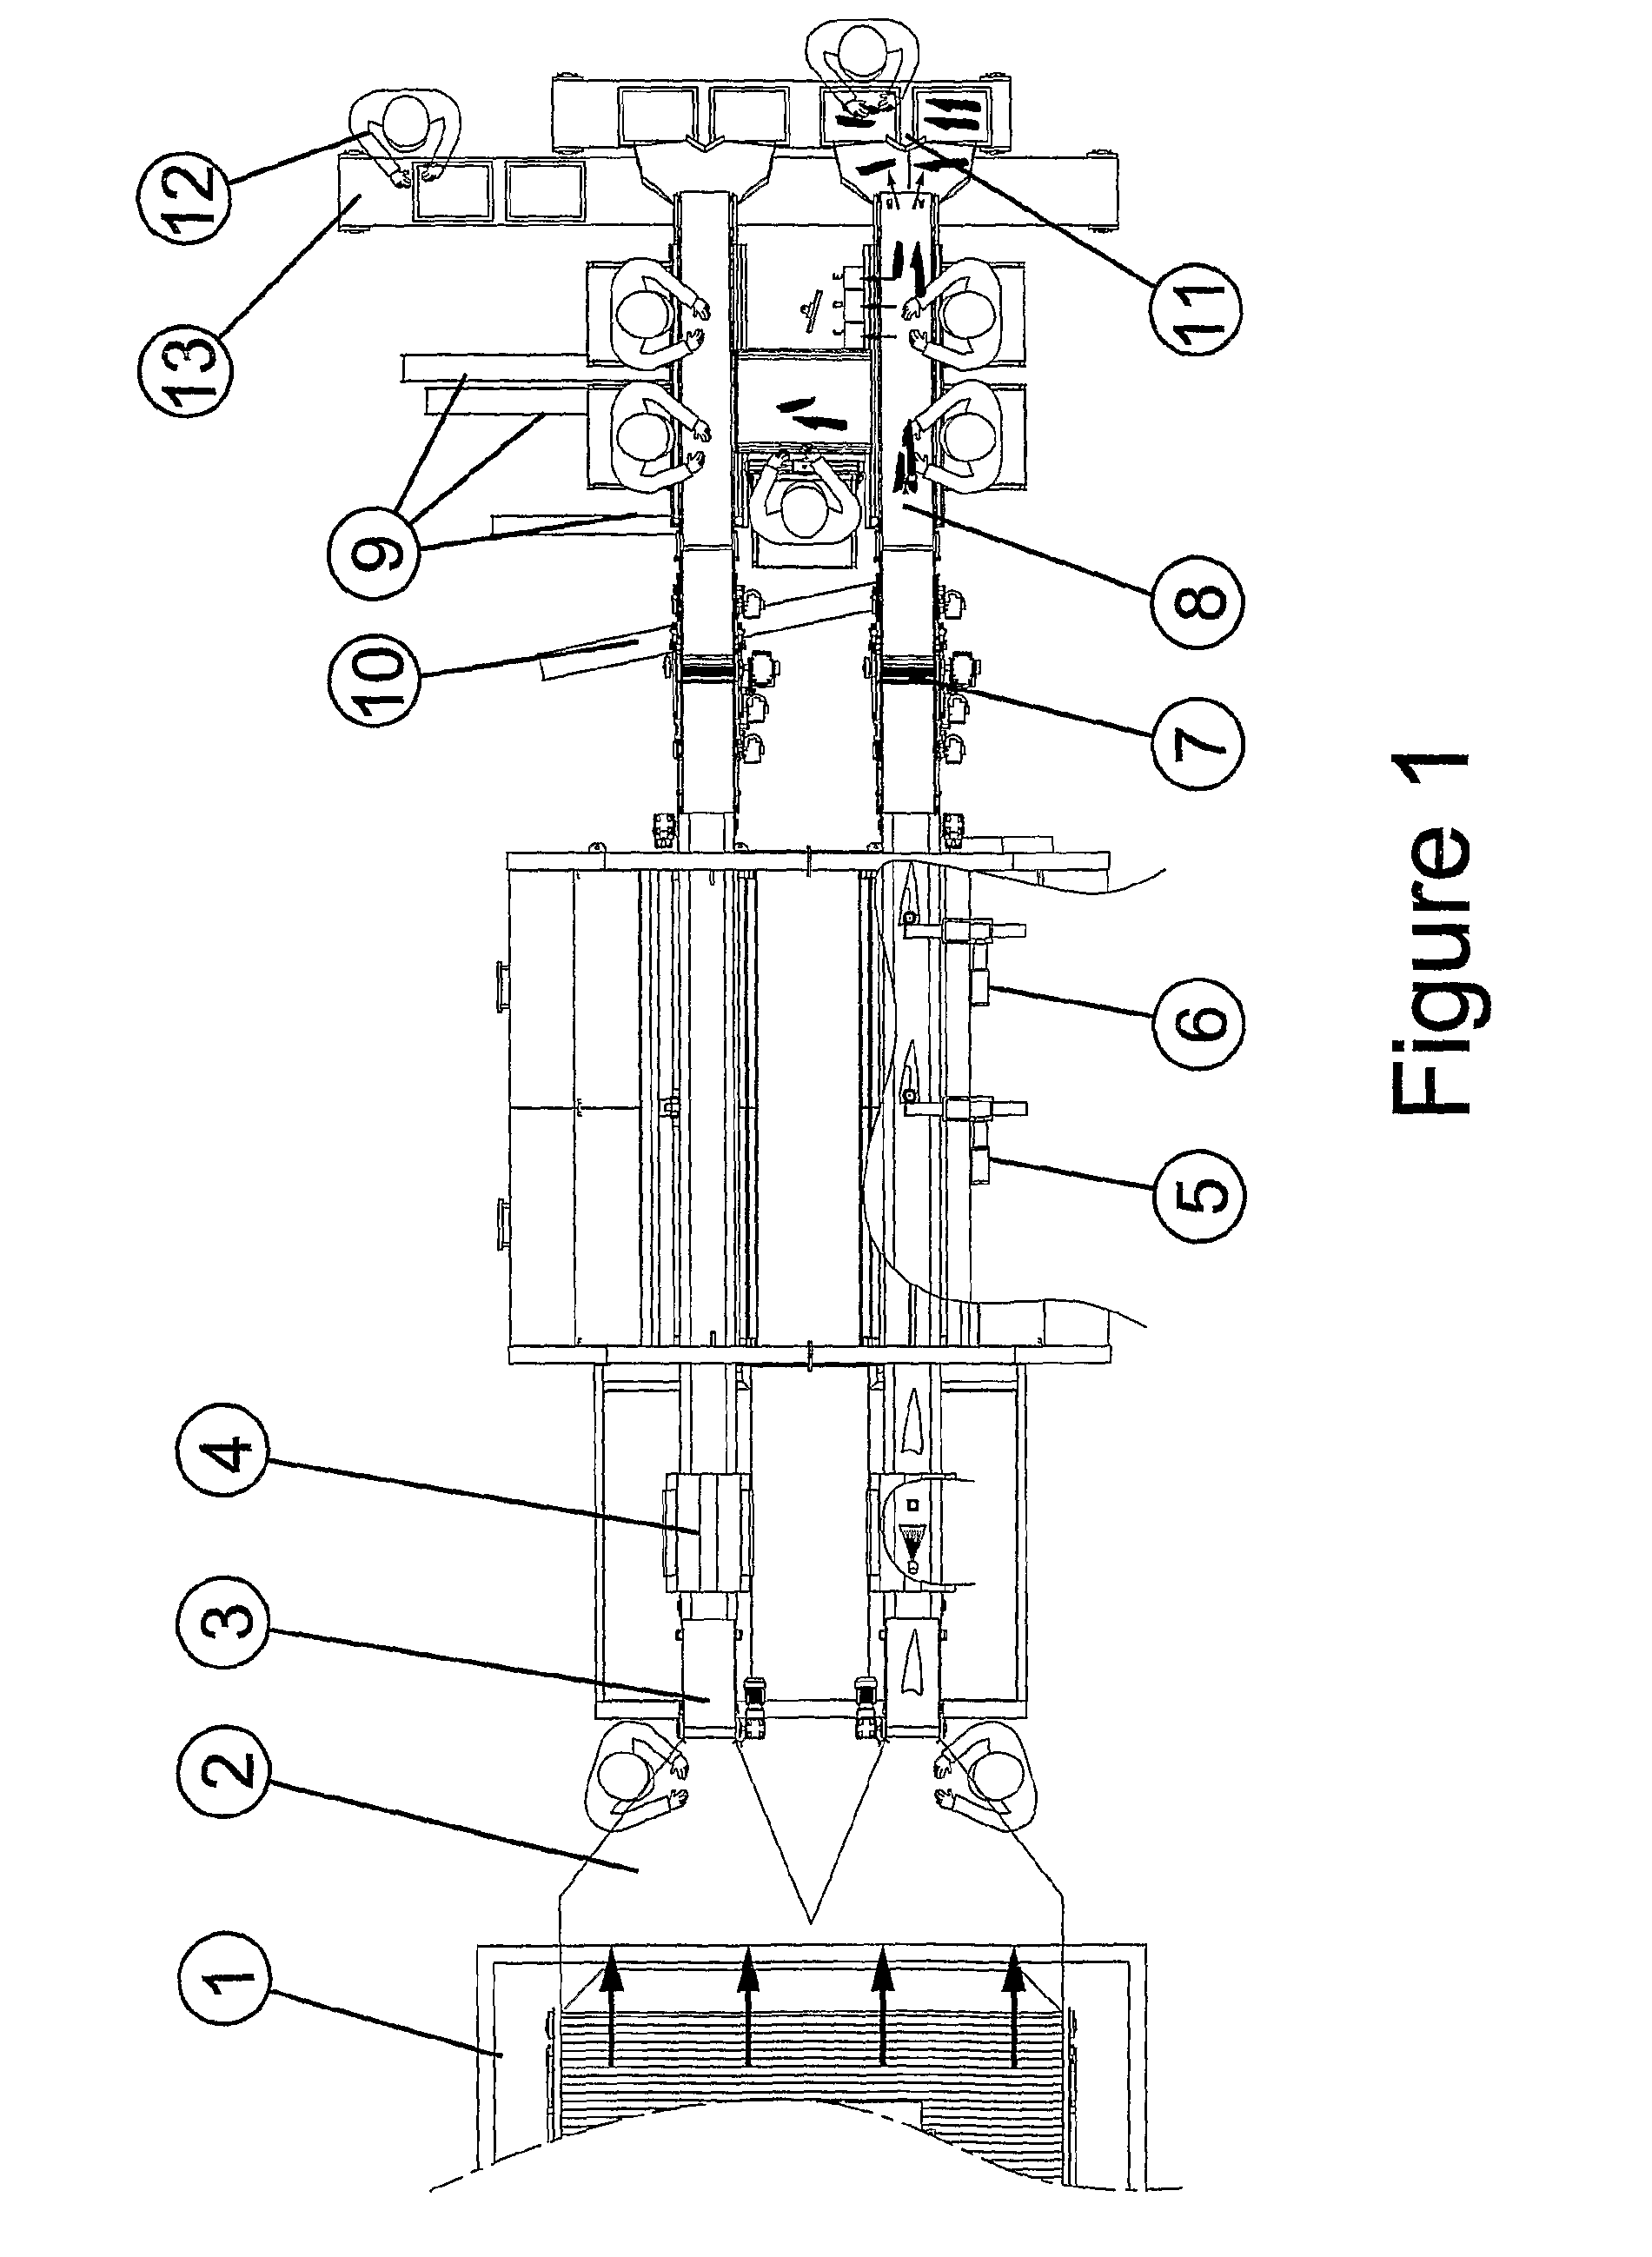 Method and an apparatus for automatic bone removal